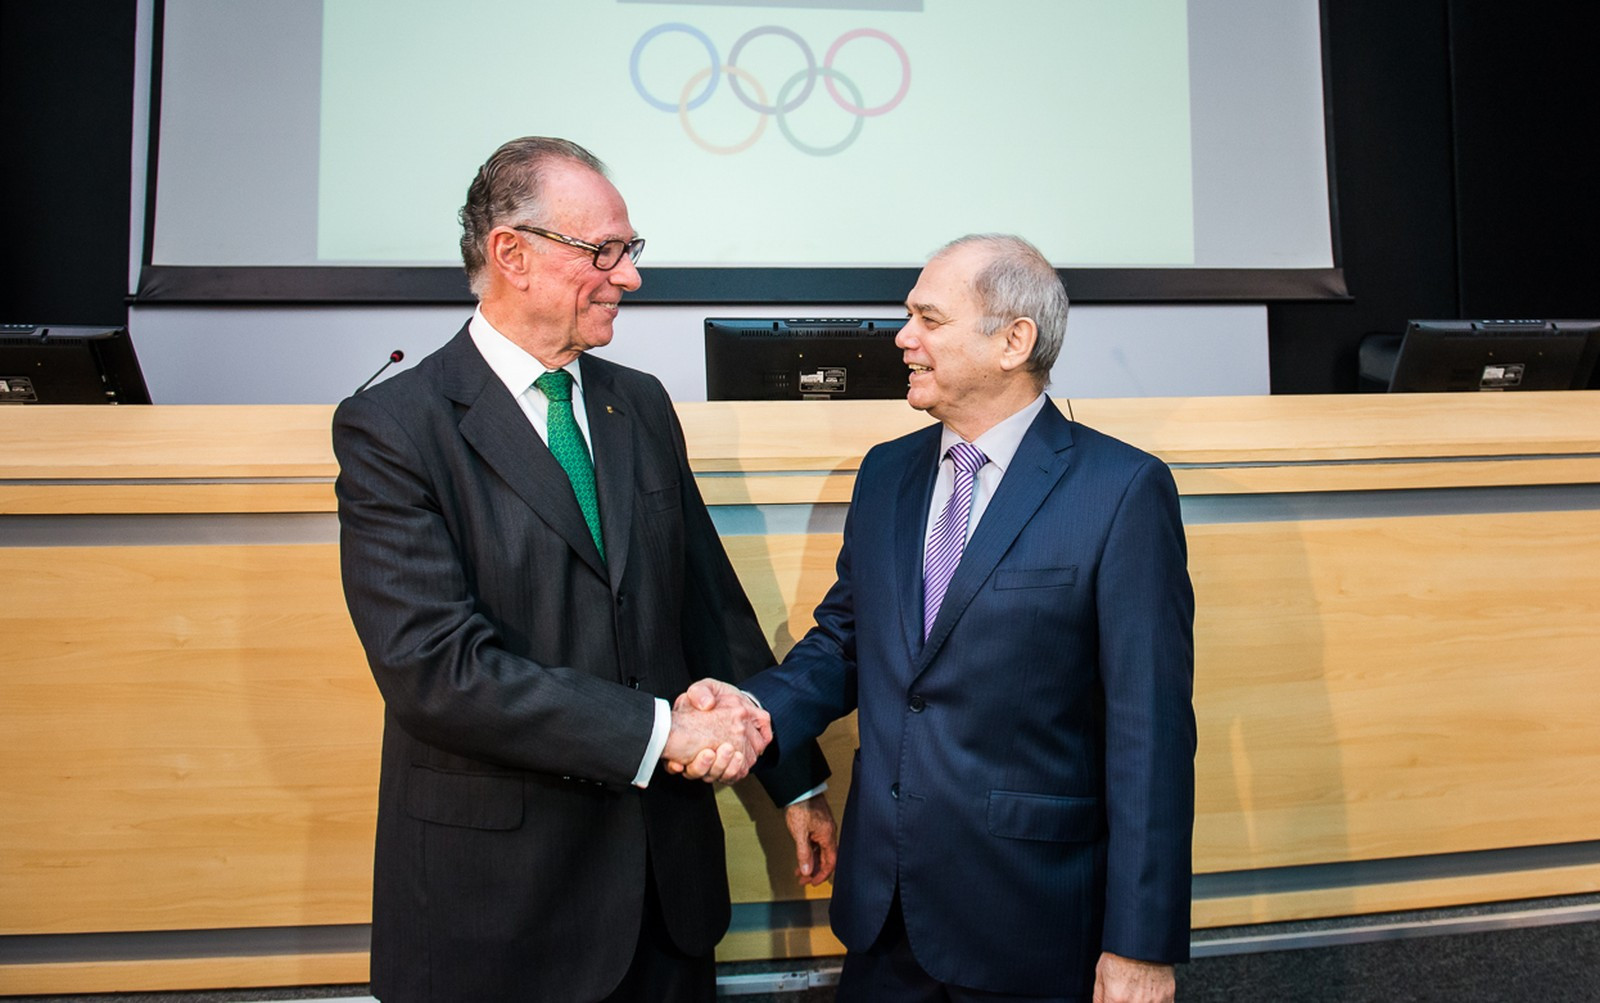 Paulo Wanderley, right, was elected as vice-president of the Brazilian Olympic Committee in April when Carlos Nuzman, left, was appointed for another spell as President ©COB